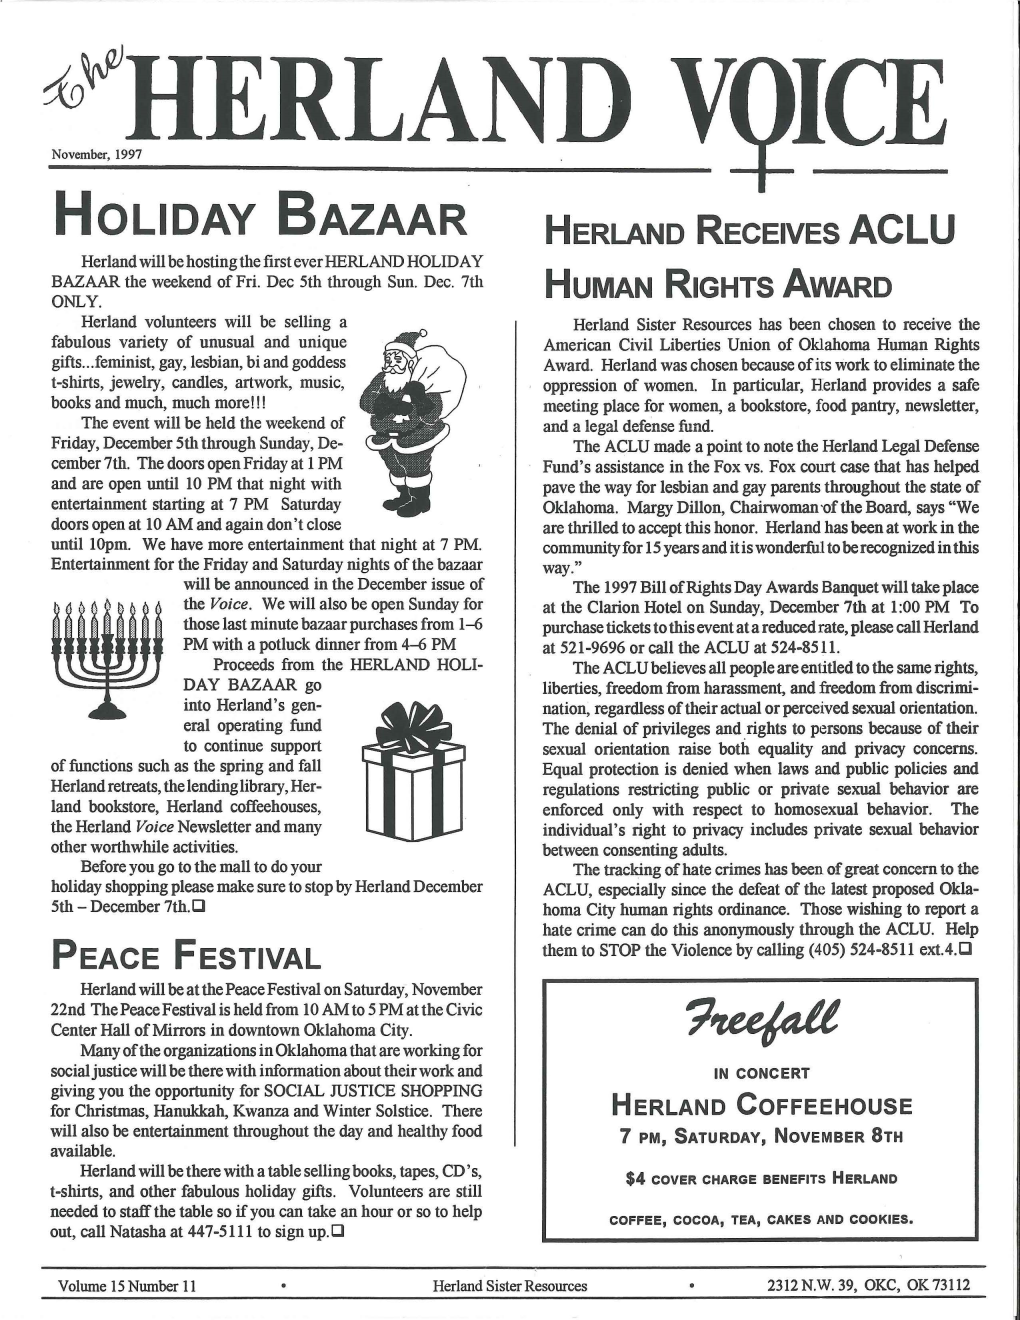 HOLIDAY BAZAAR HERLAND RECEIVES ACLU Herland Will Be Hosting the First Ever HERLAND HOLIDAY BAZAAR the Weekend of Fri